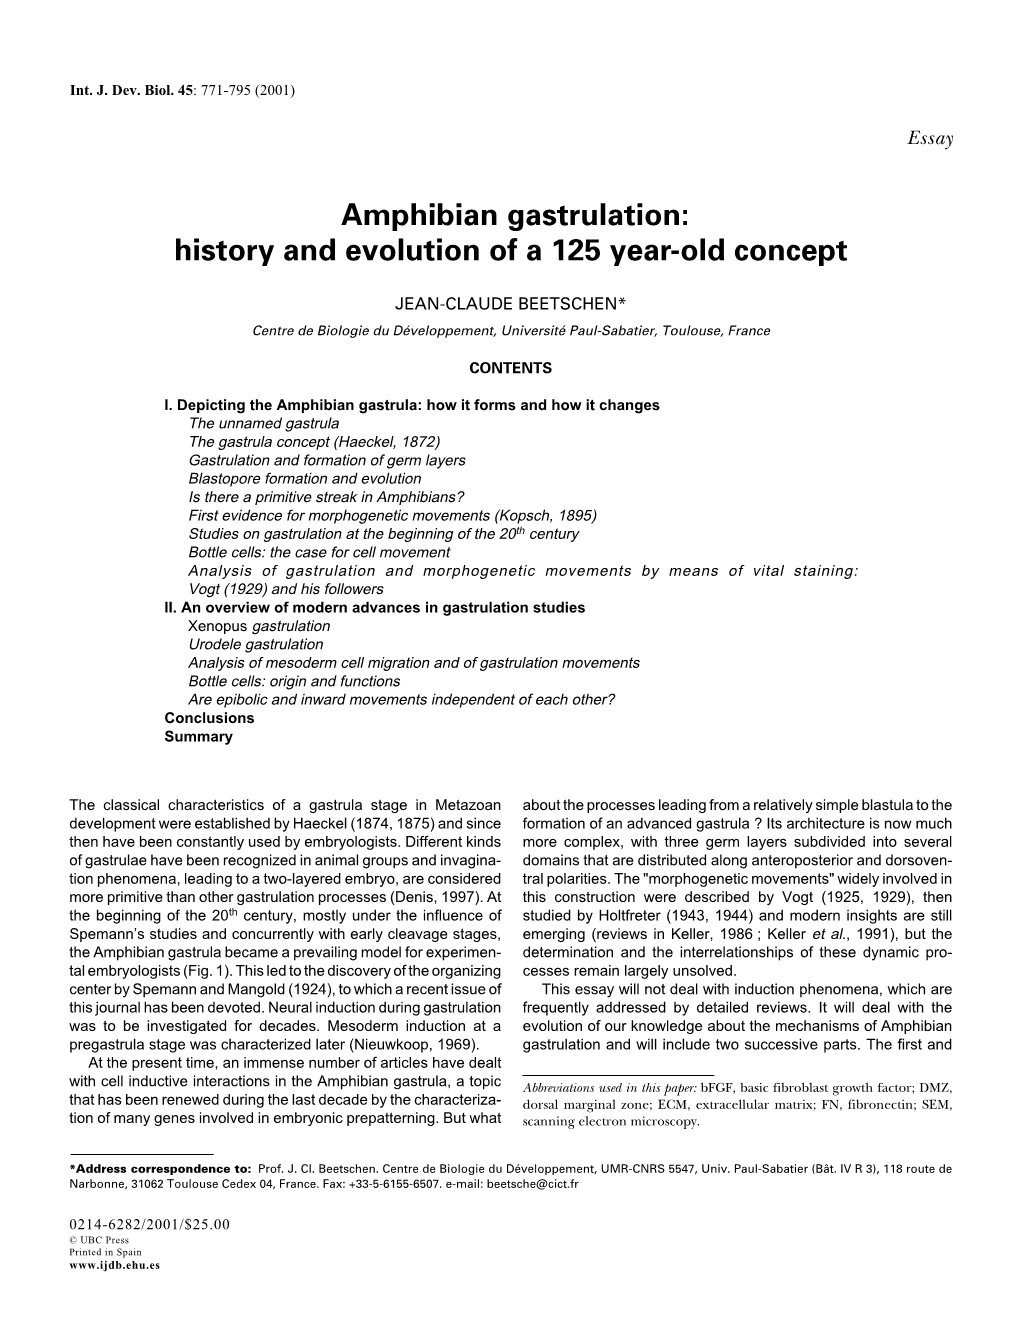 Amphibian Gastrulation: History and Evolution of a 125 Year-Old Concept